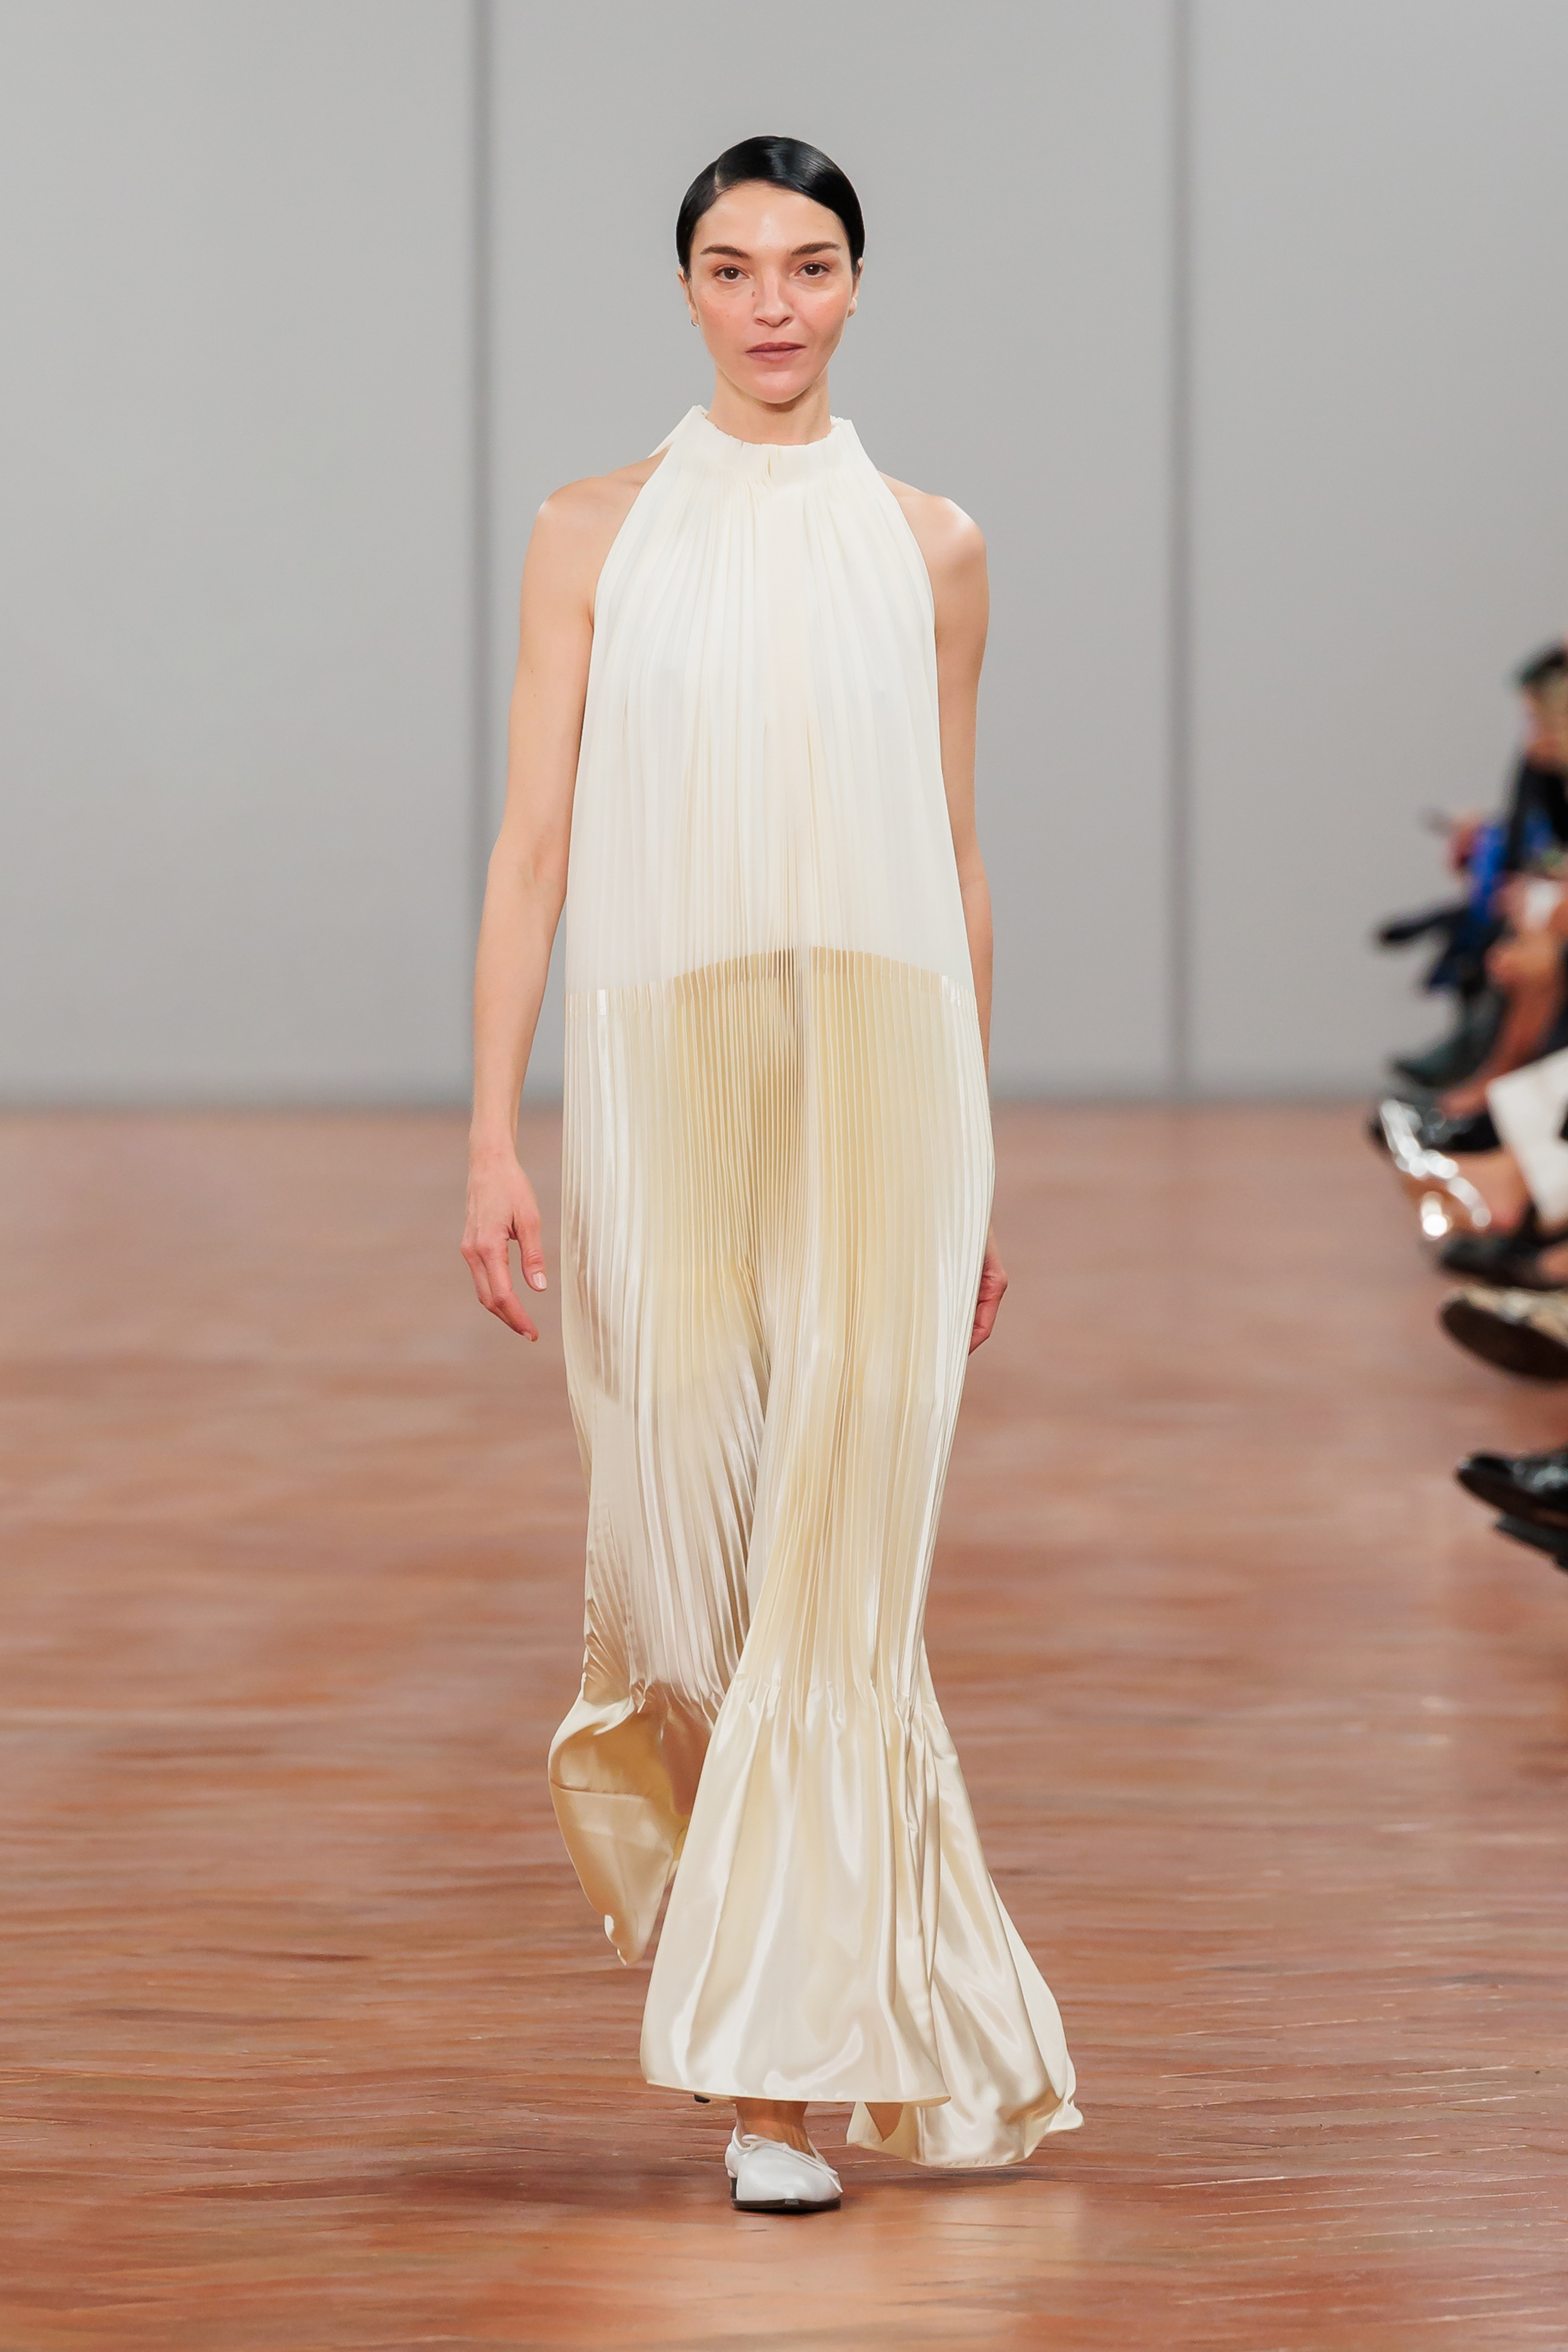 Model on runway wearing a high-neck pleated gown with a draped neckline